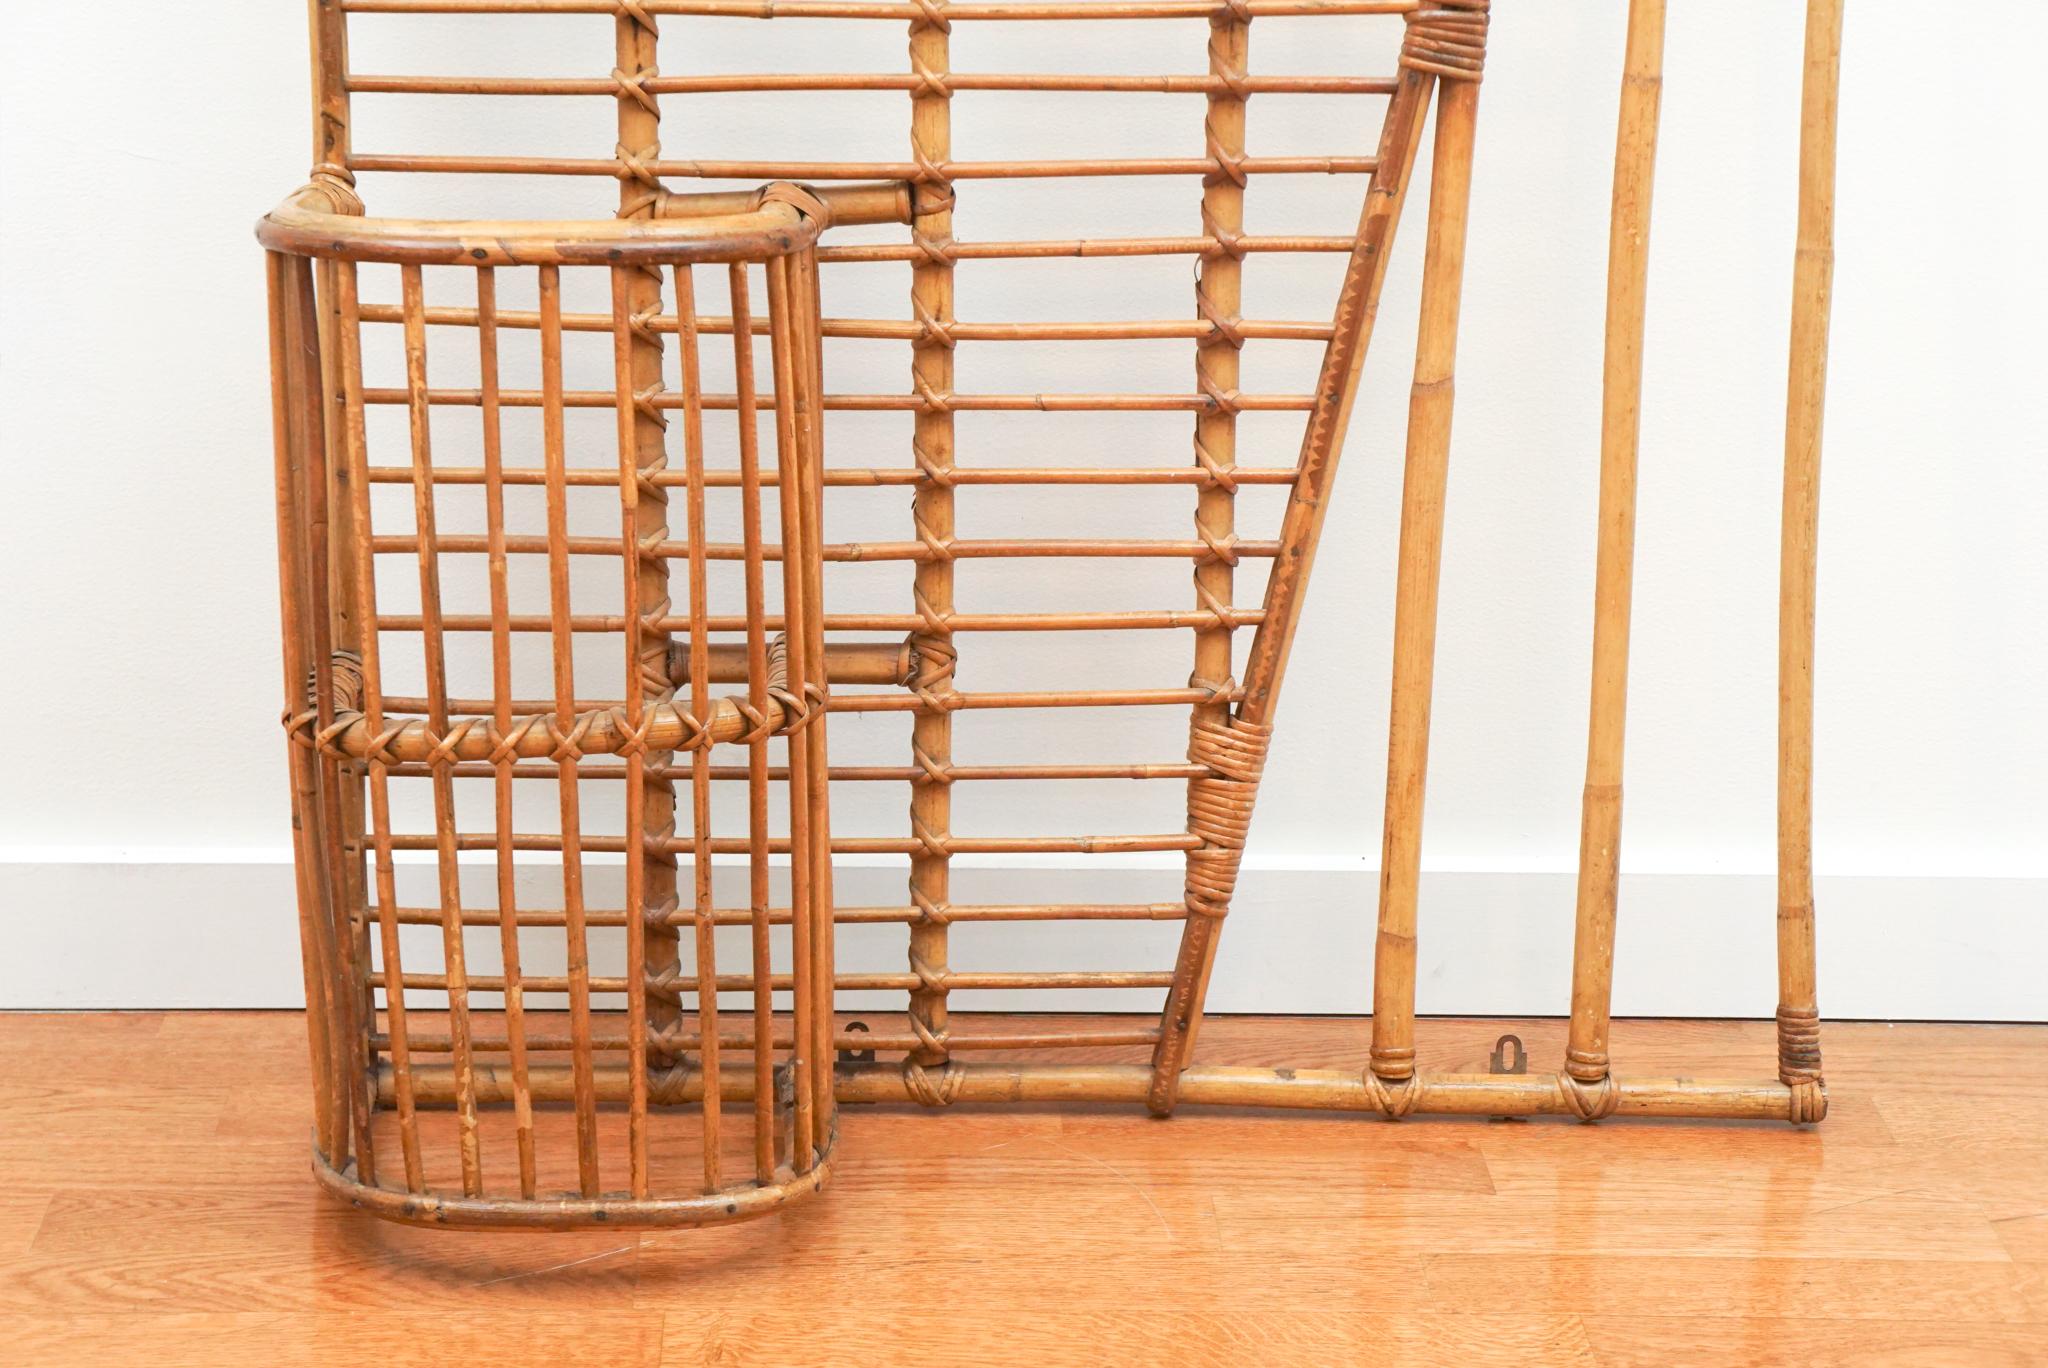 Designed by French furniture designer Louis Signot circa 1960s, this vintage rattan coat rack with umbrella stand is as decorative as it is useful. The design combines vertical and rounded rattan elements that are intricately fastened to include